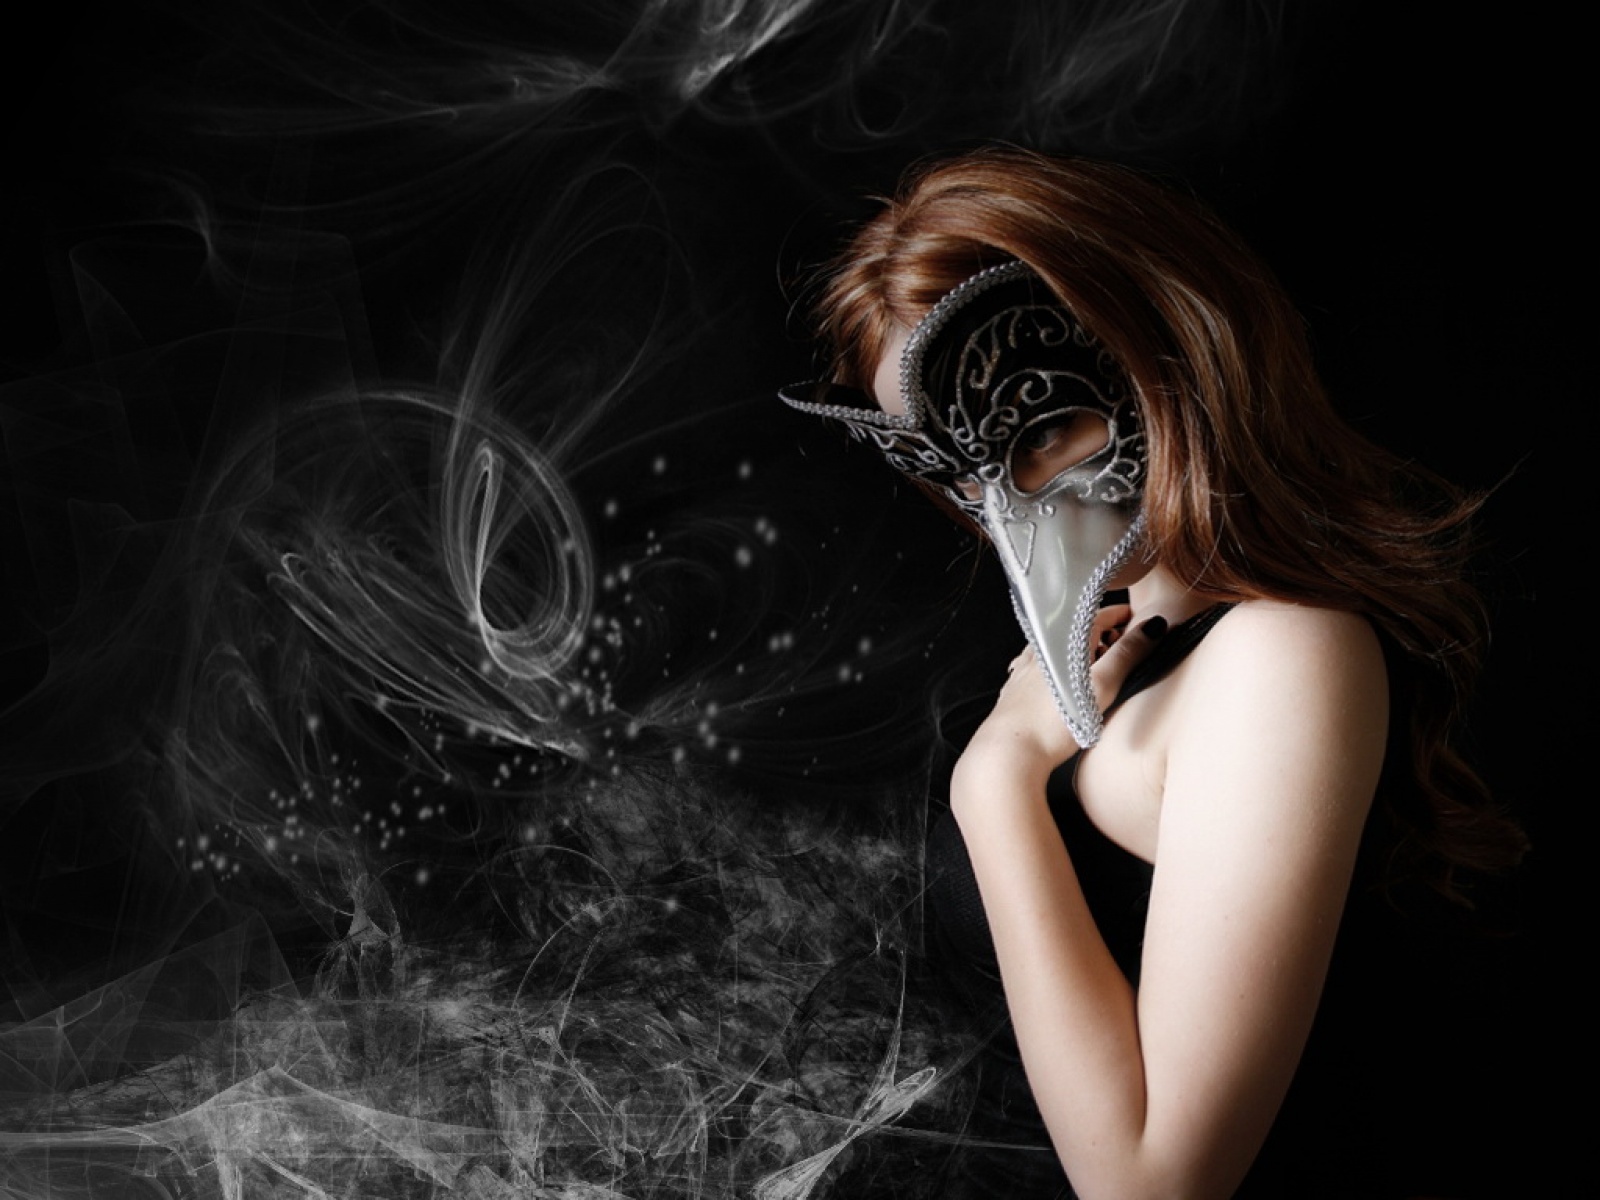 Masked person in a captivating photography.